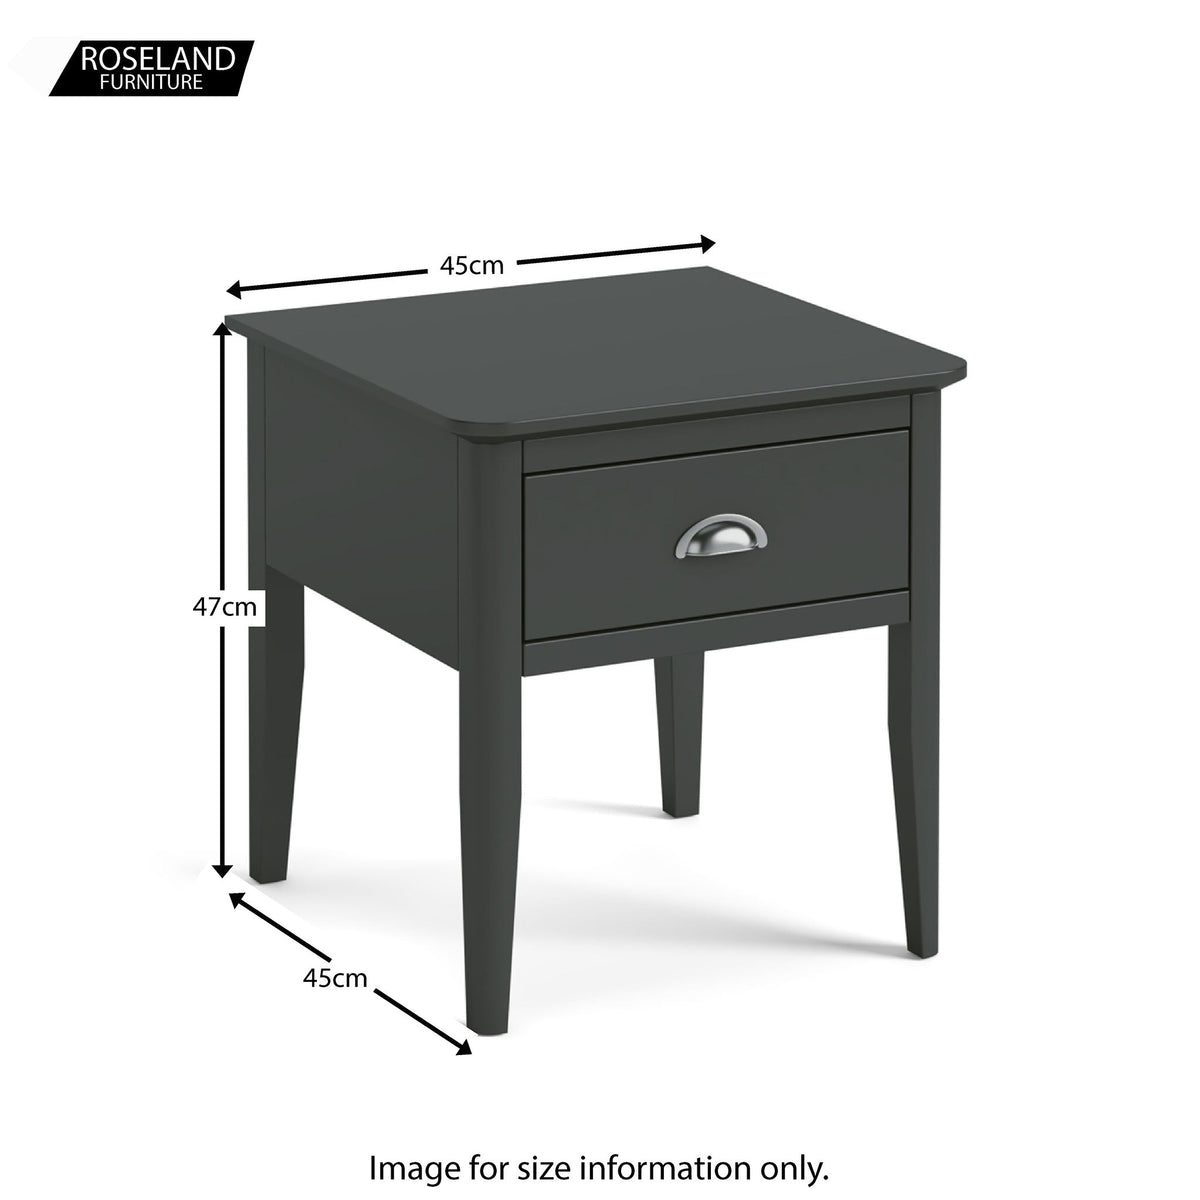 Dumbarton Charcoal Lamp Table - Size Guide